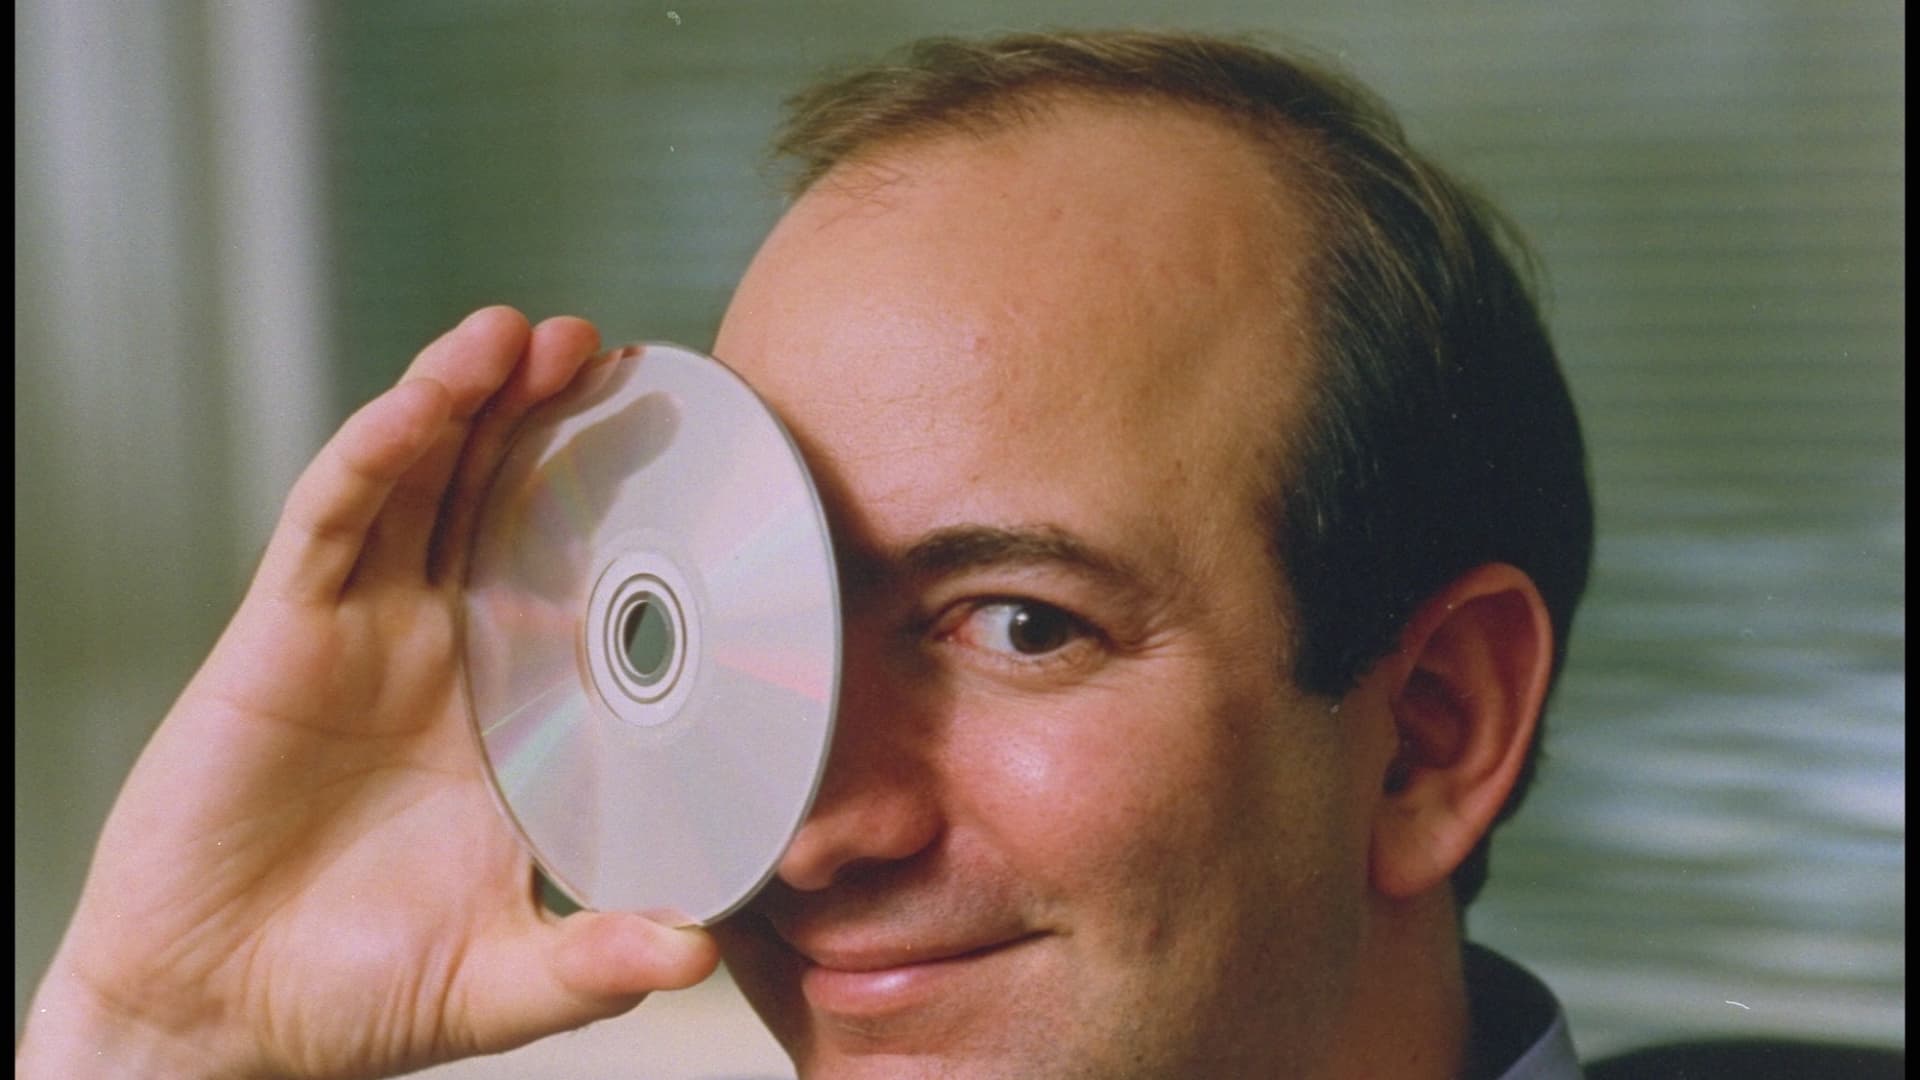 Jeff Bezos, CEO and founder of Amazon.com in 1999